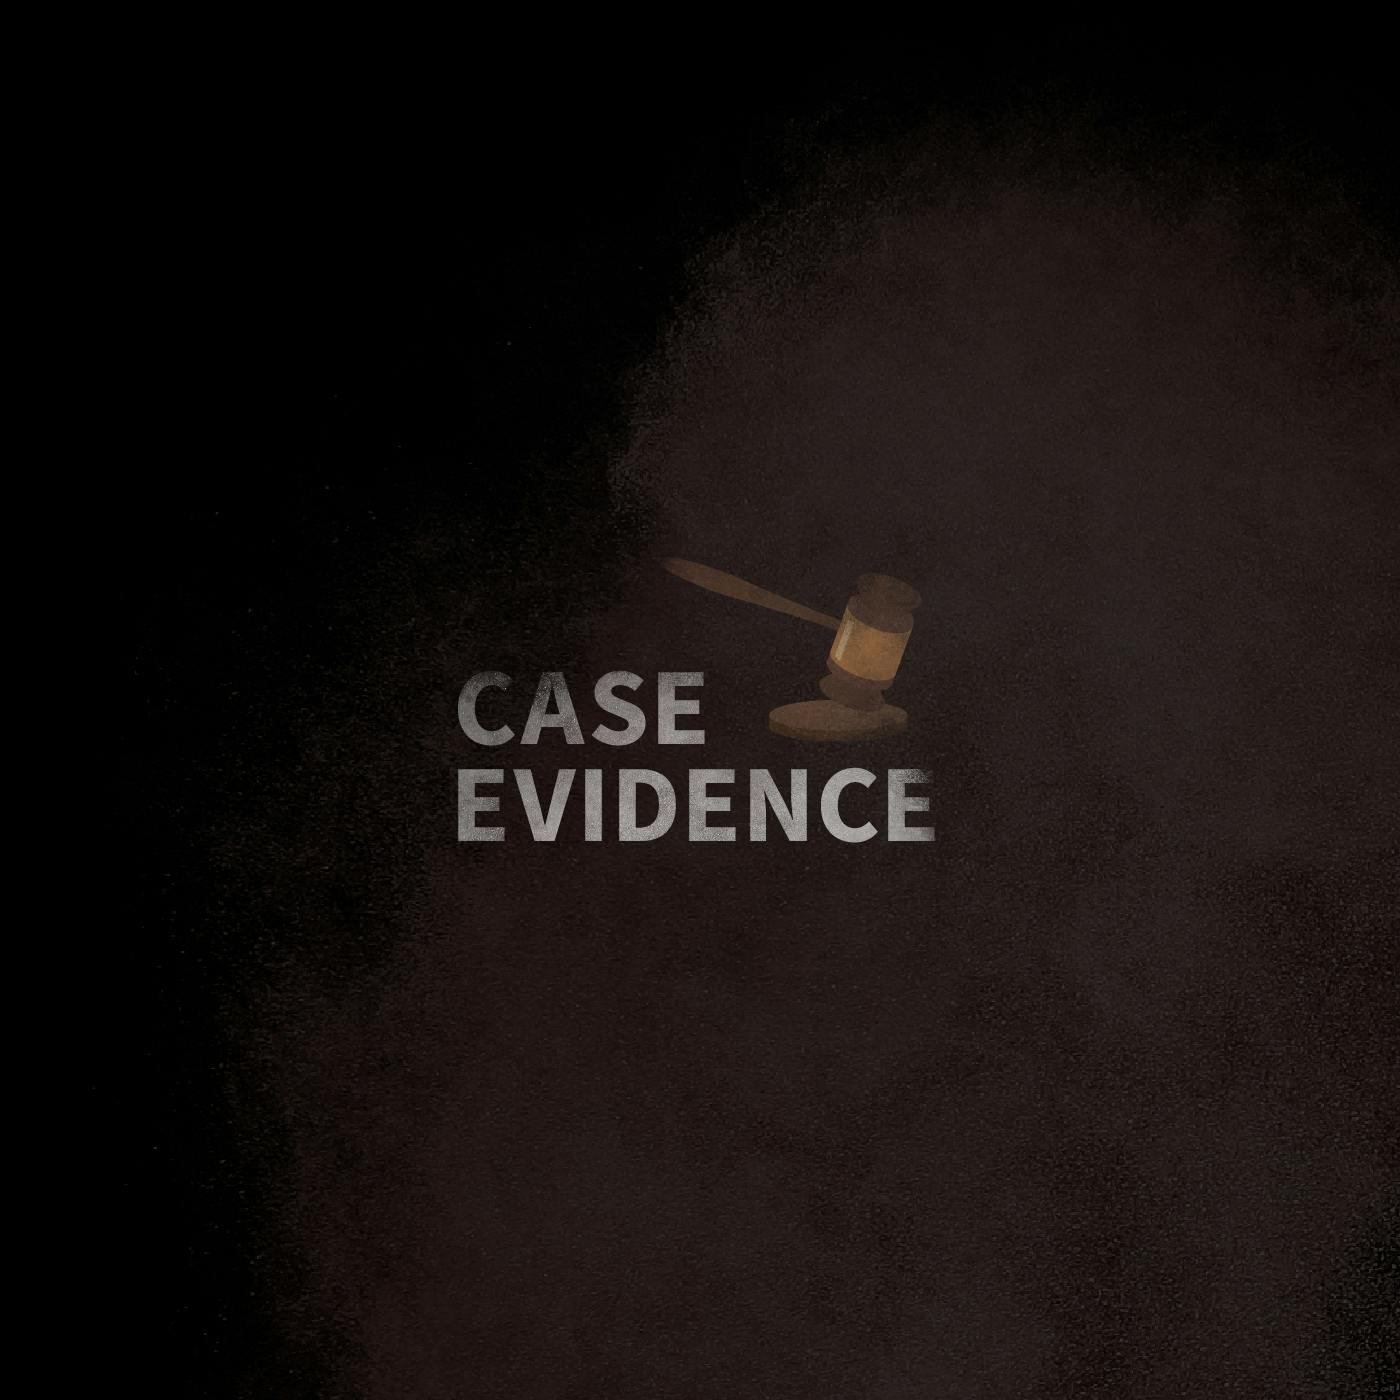 Case Evidence 10.17.16 by Tenderfoot TV